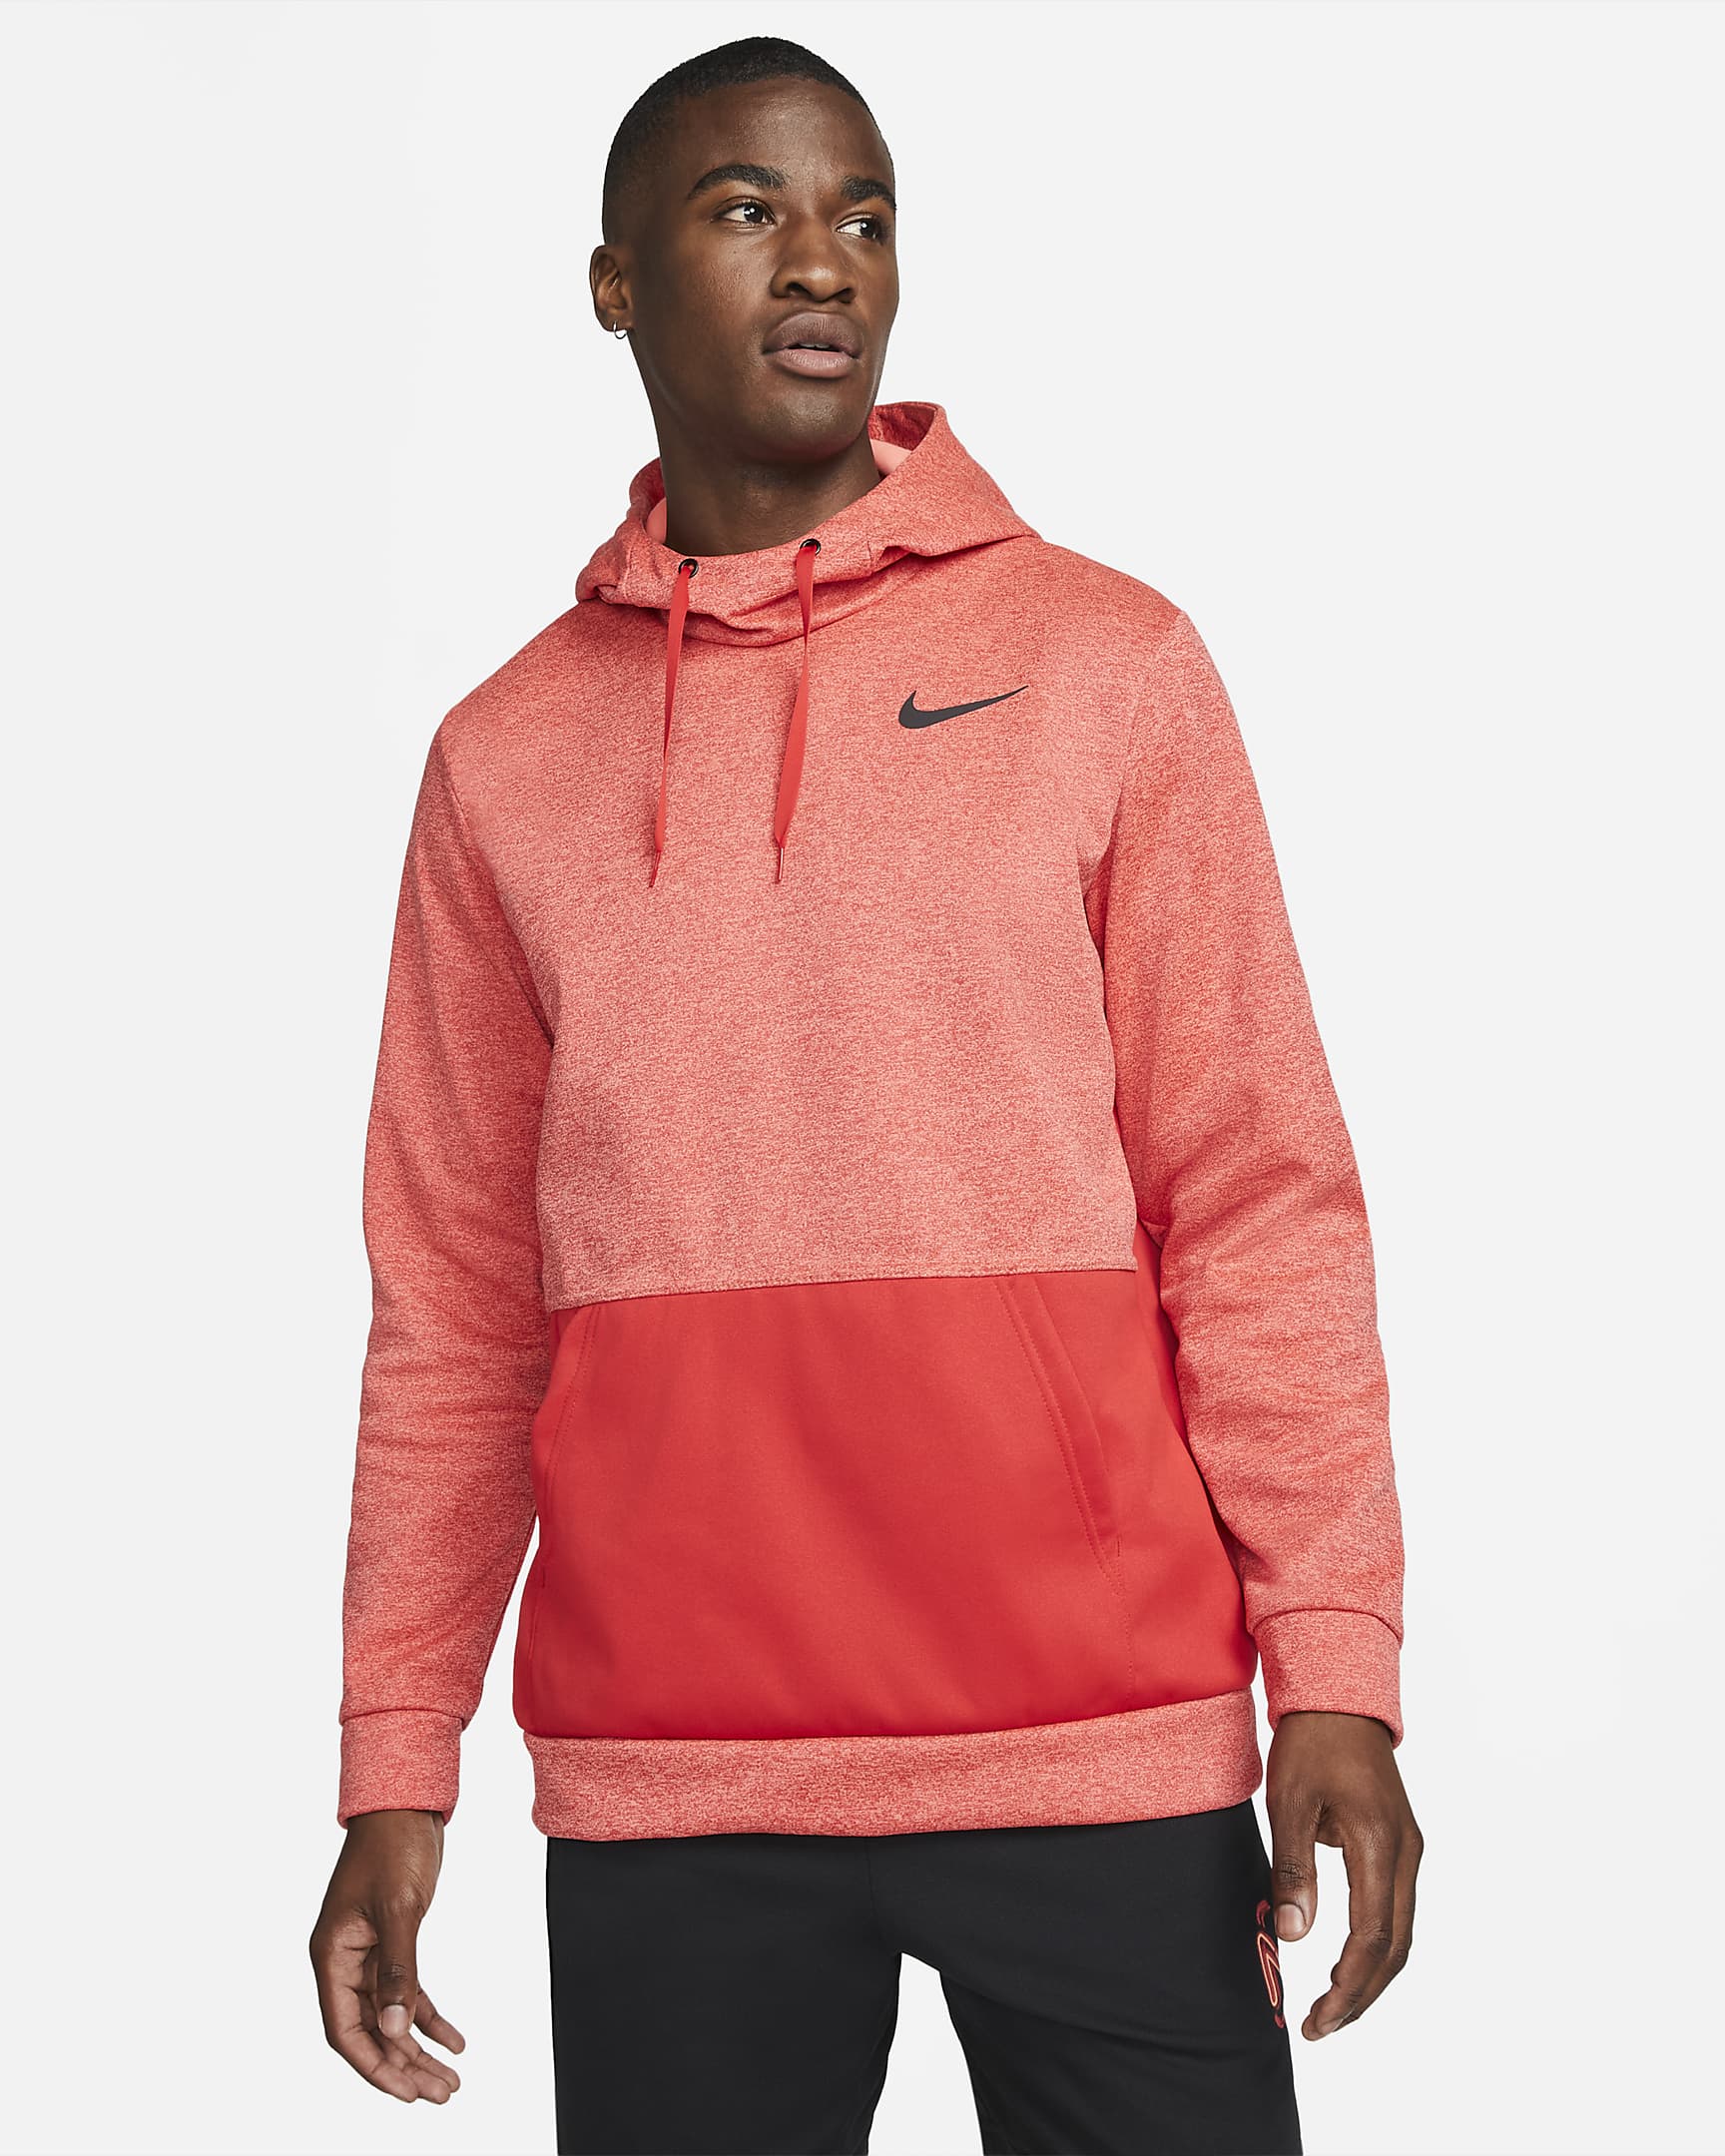 Nike Men's Training & Gym Collection